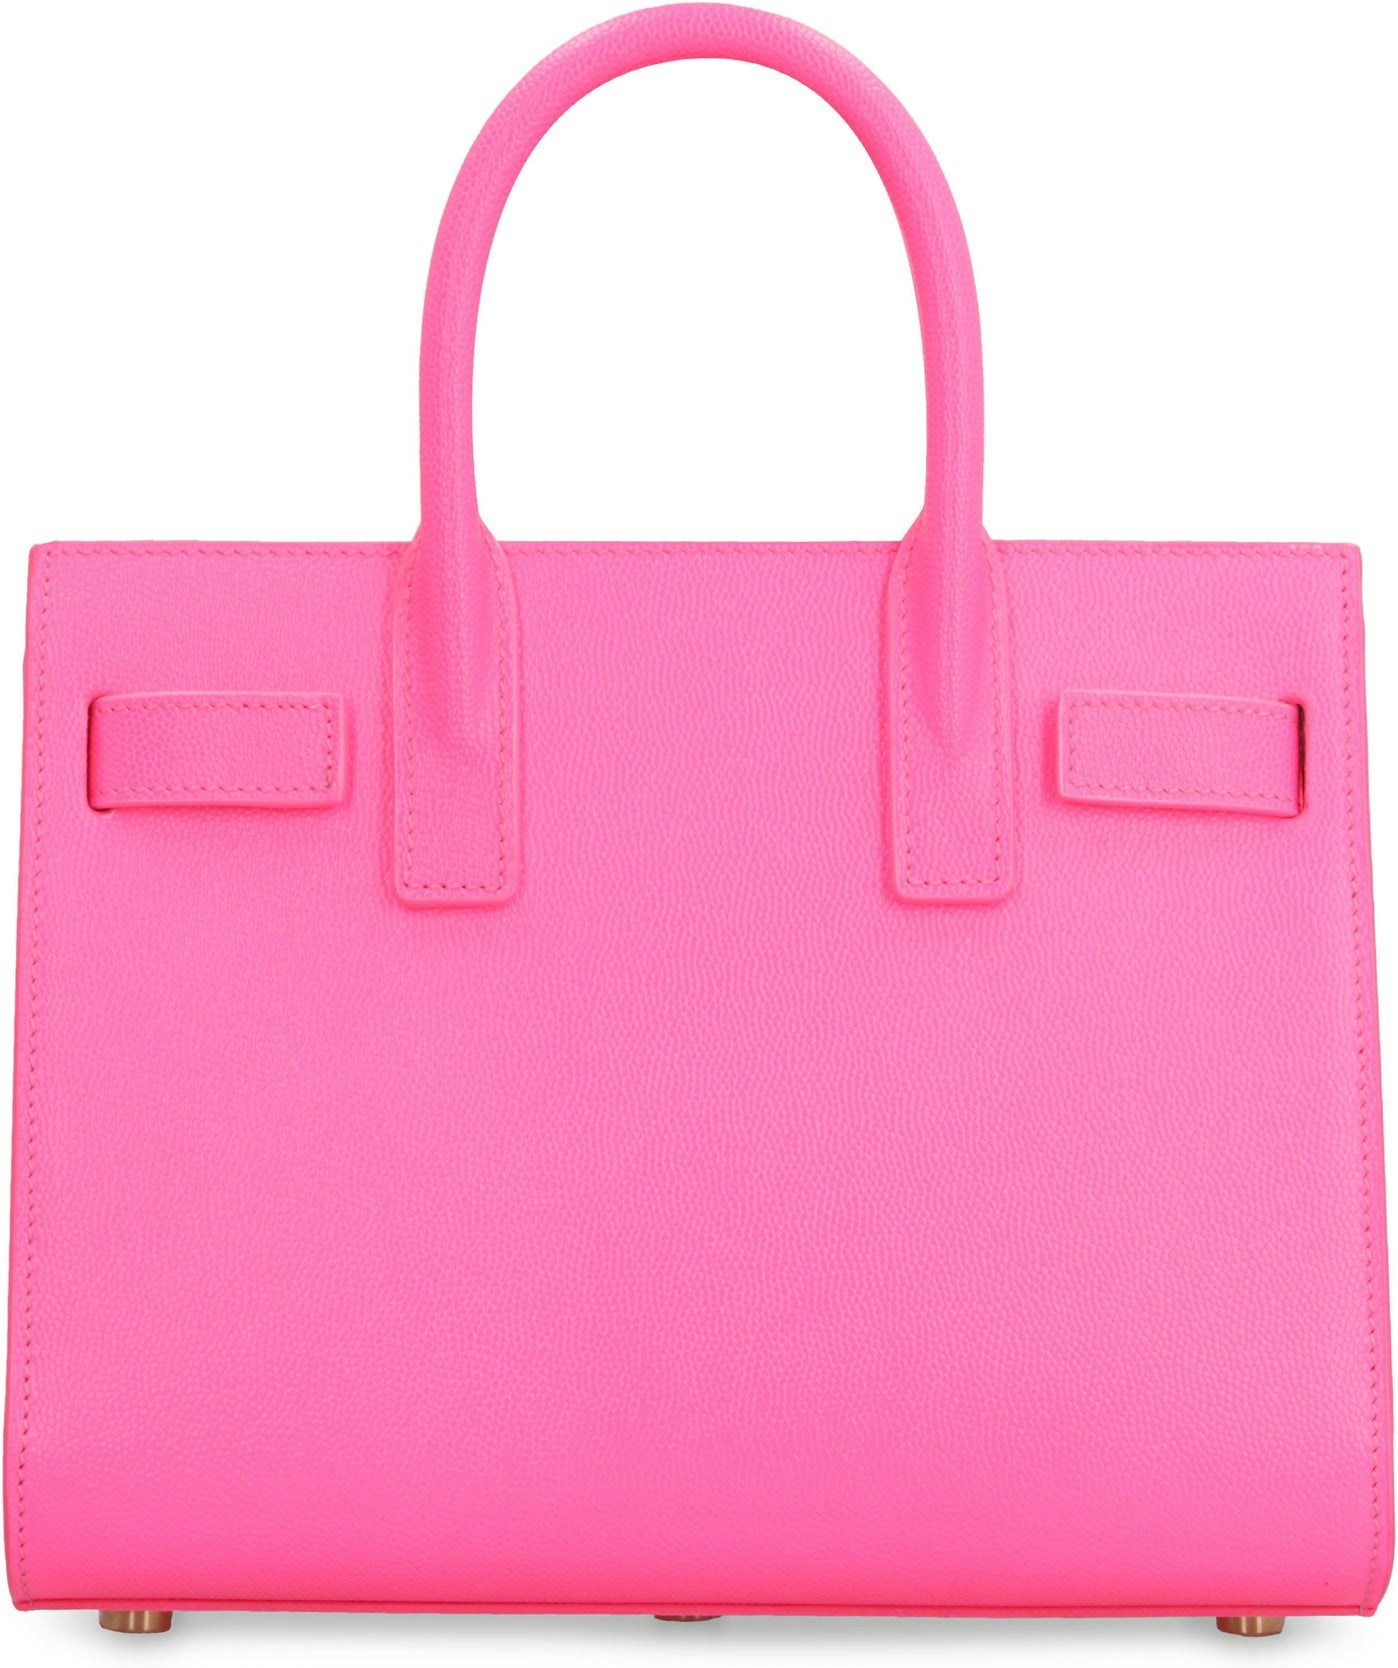 Saint Laurent Nano Sac Du Jour Tote Bag In Grained Leather in Pink